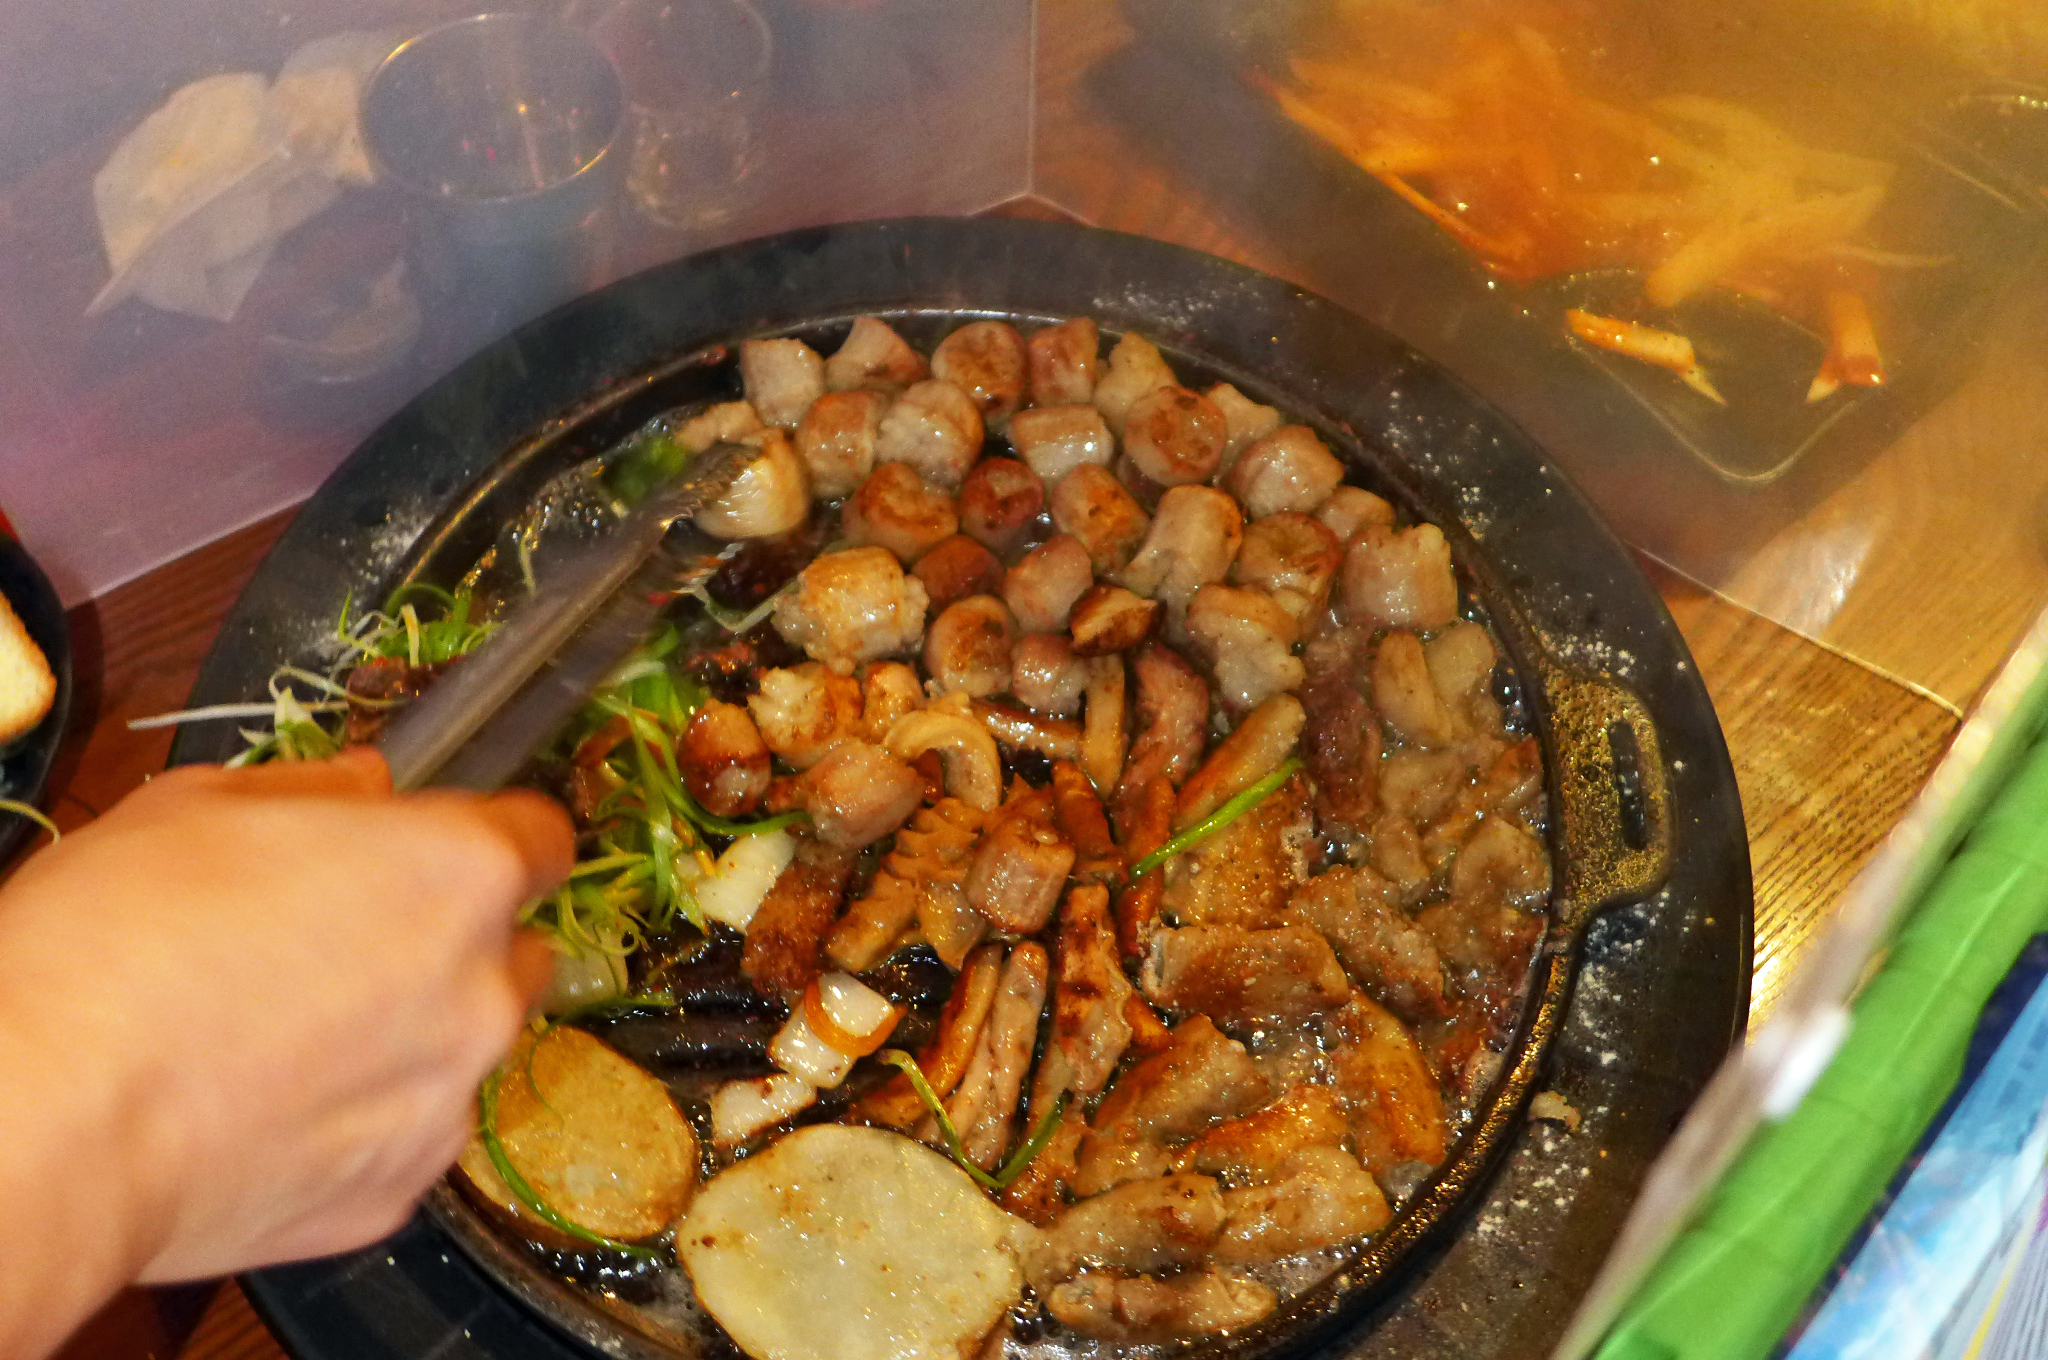 A round pan with nuggets of organ meat of various sorts.